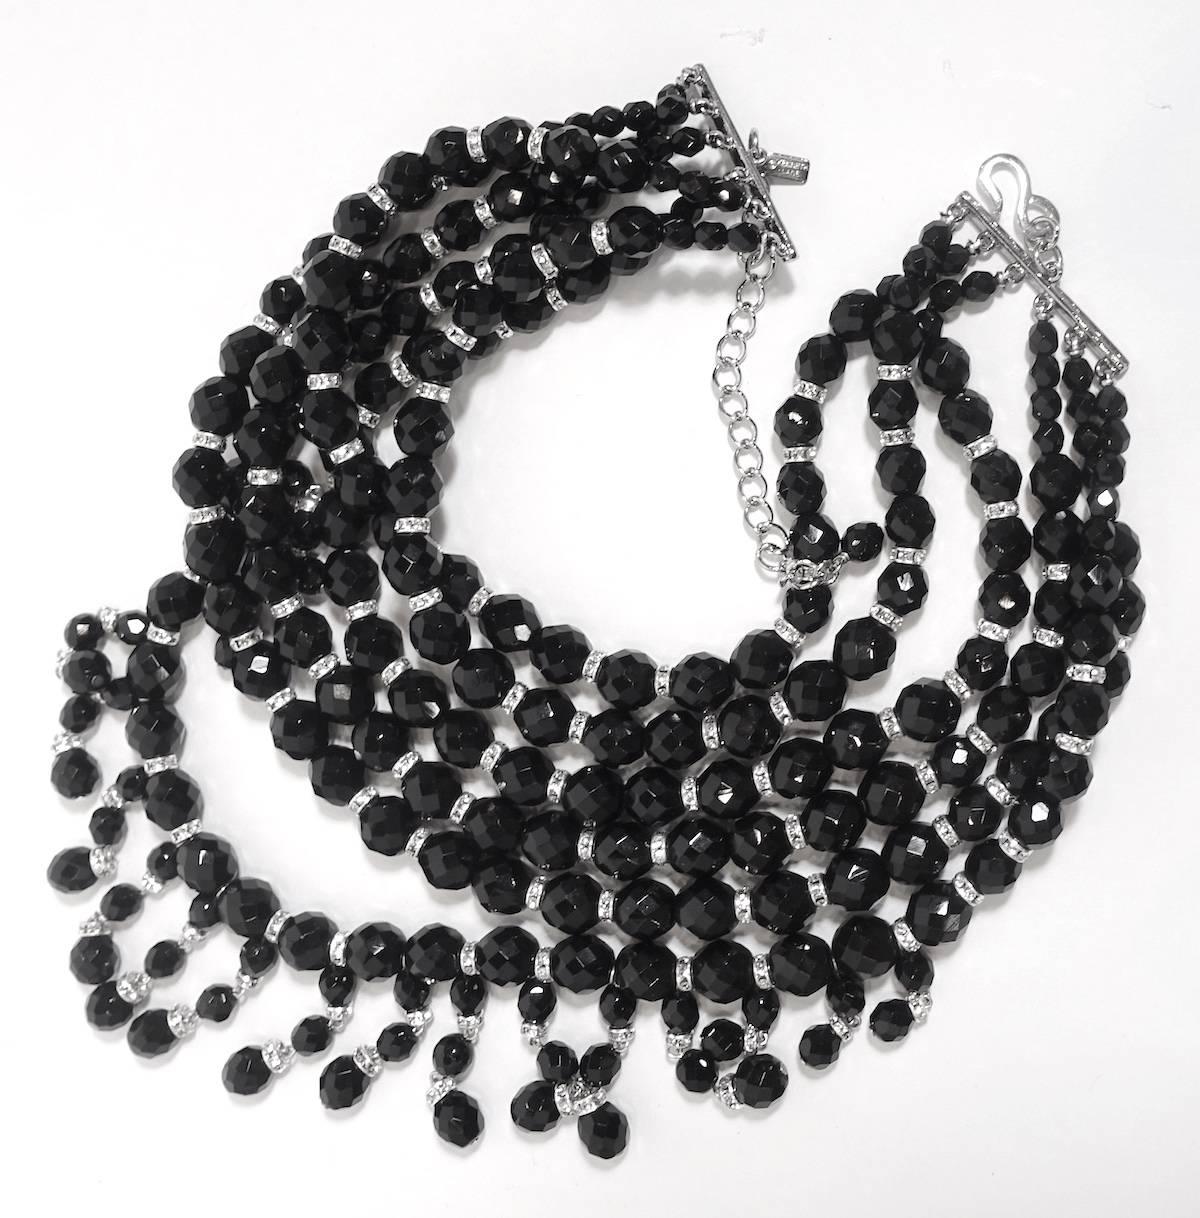 This signed Kenneth Lane beaded bib necklace features 6 strands of faceted black glass beads with rhondelle crystal spacers in a nickel-free silver-plated base metal setting.  This necklace measures 18” long with a hook closure.  The center falls